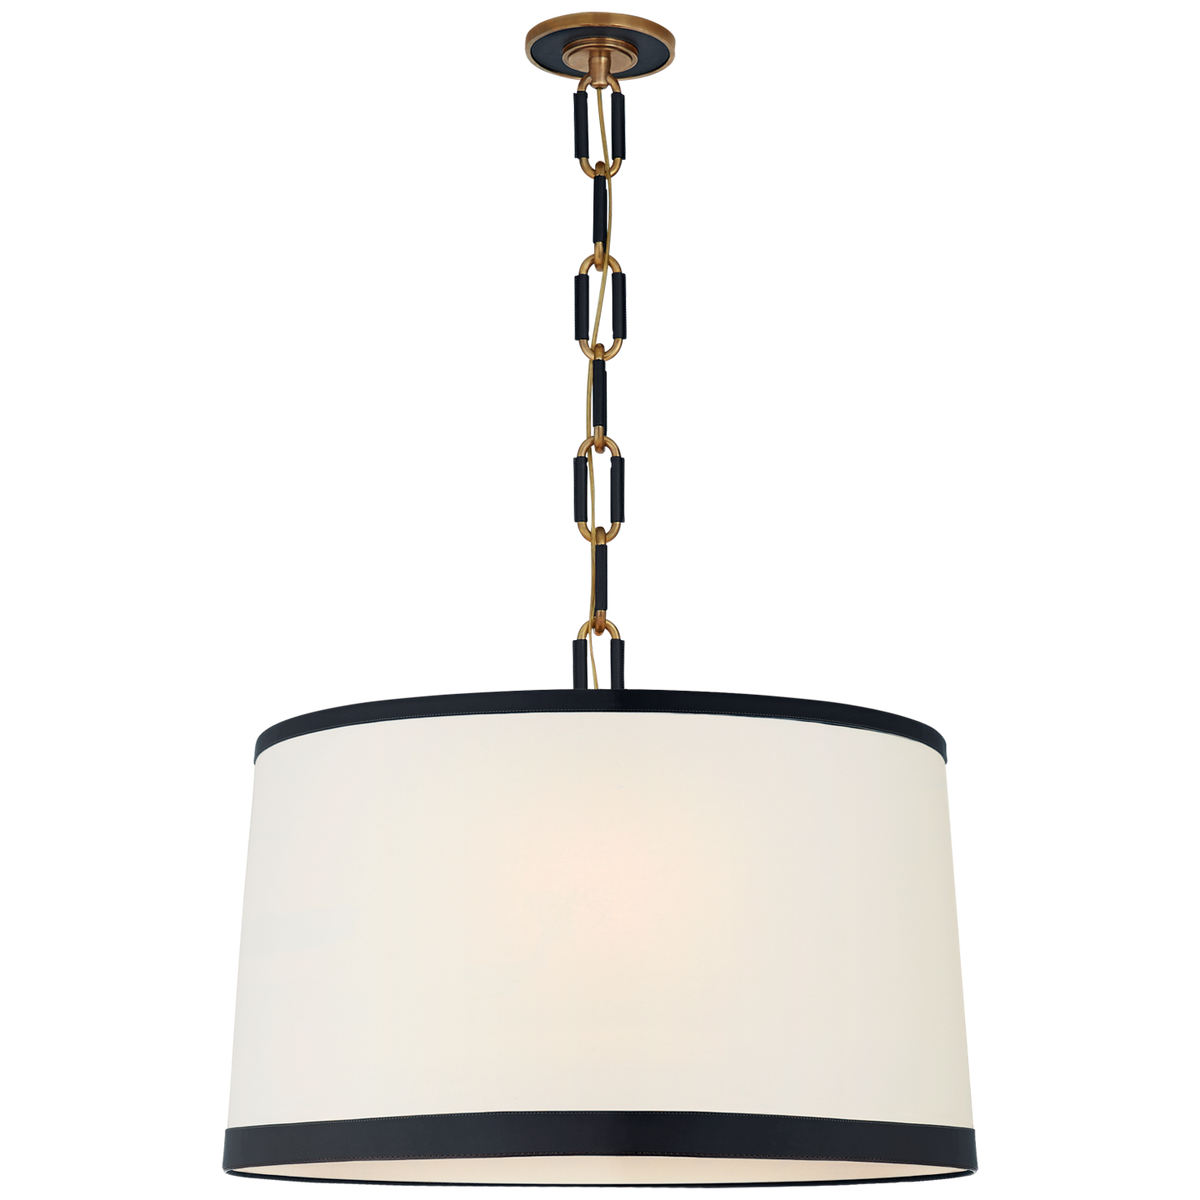 Cody Large Hanging Shade - Natural Brass And Navy Leather Trim